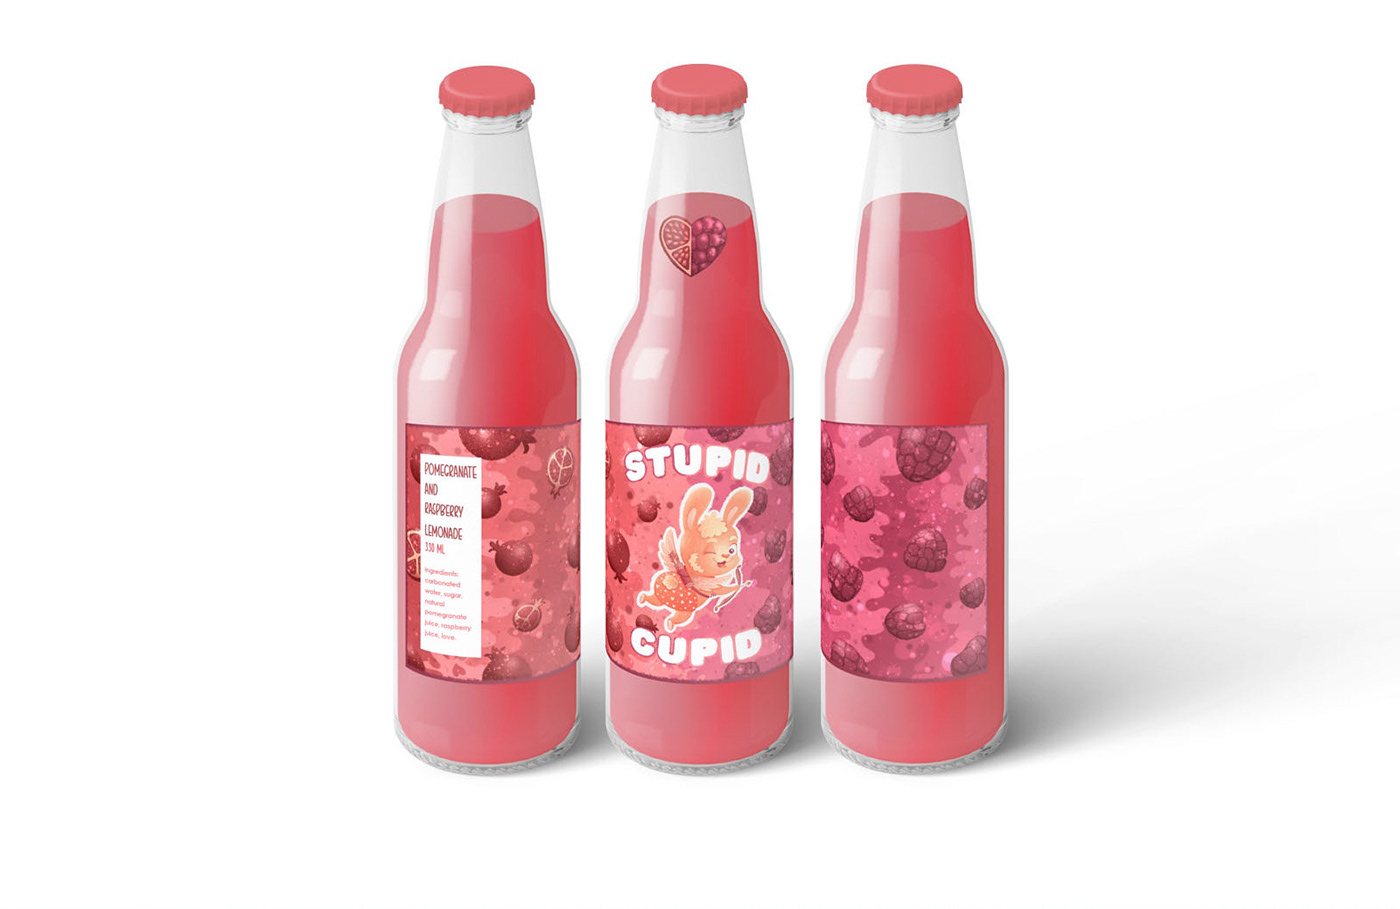 bunny Character design  cupid cute character drink lemonade Love Packaging product design  Valentine's Day